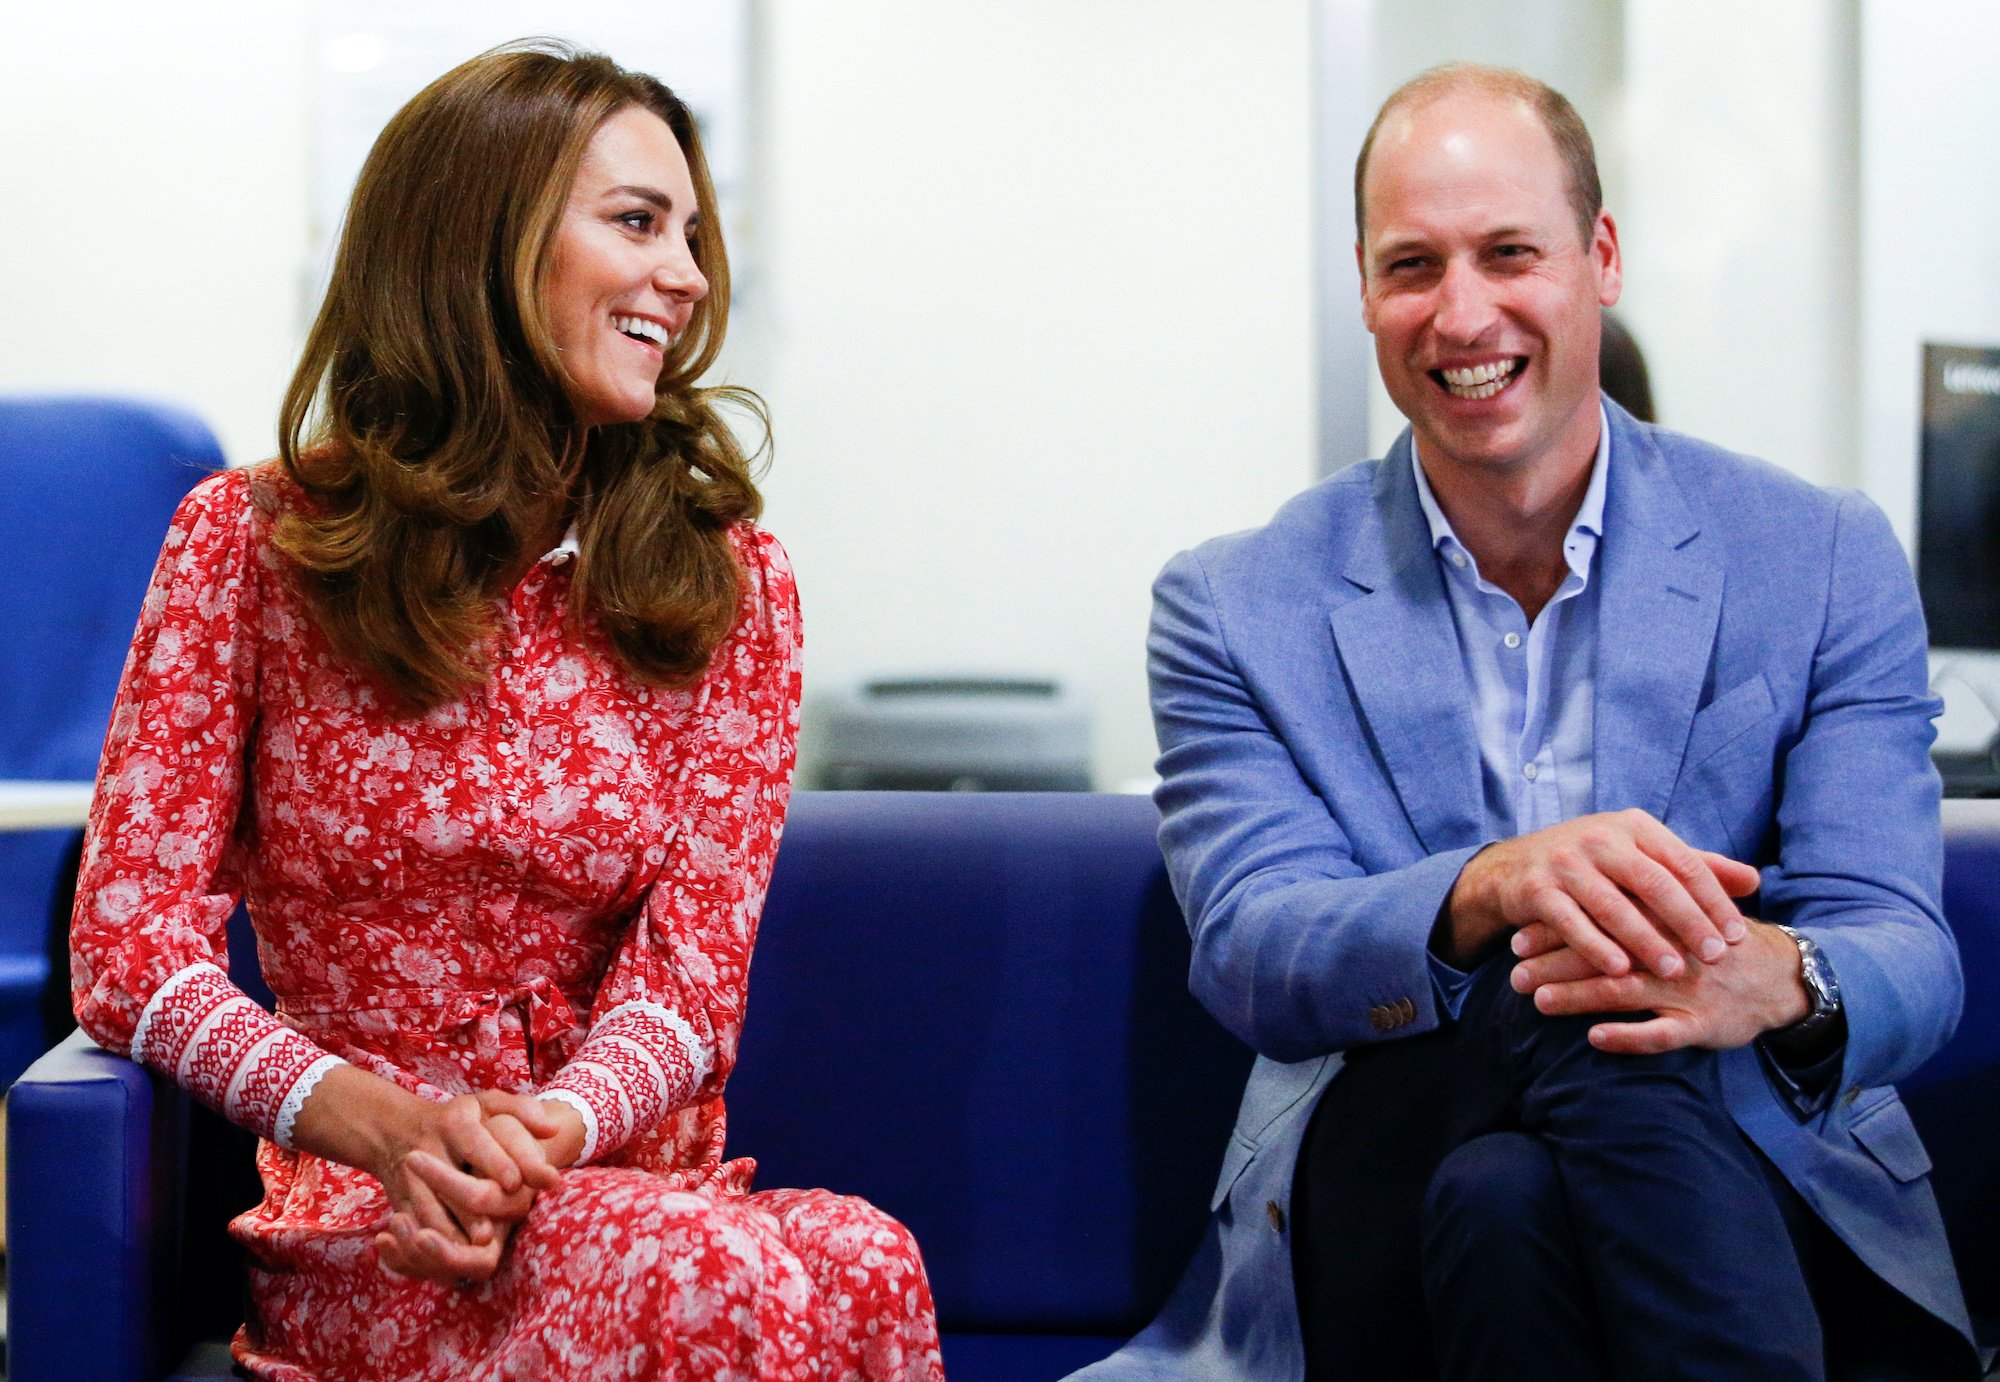 (L-R) Kate Middleton and Prince William laughing